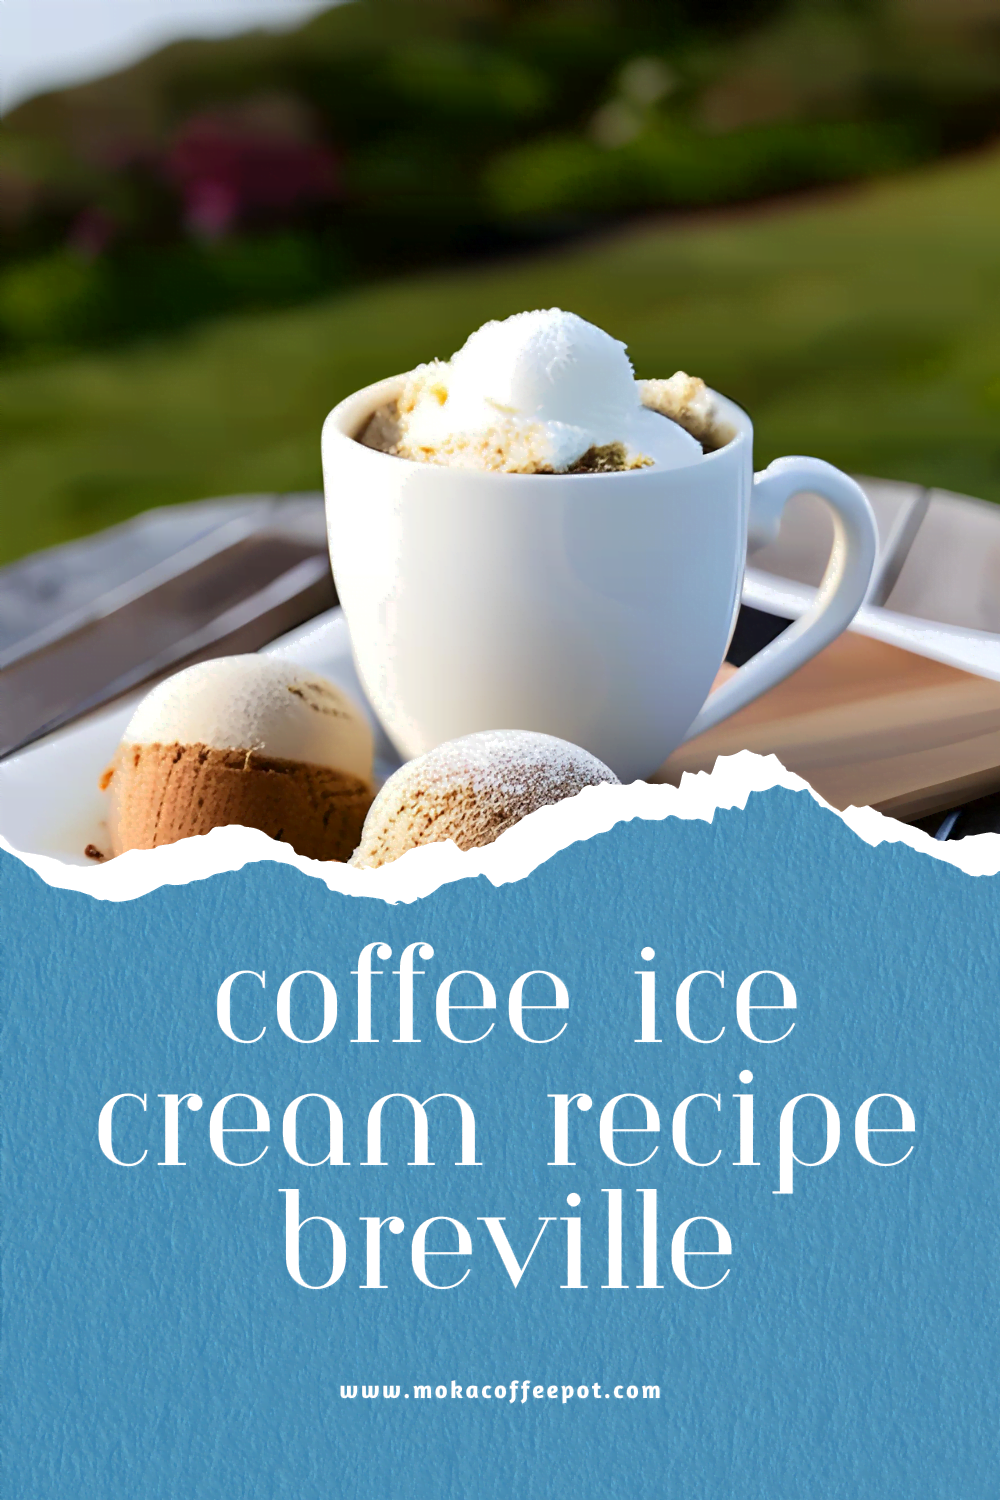 Coffee ice cream recipe breville : Indulge in a Tasty and Guilt-Free Treat!